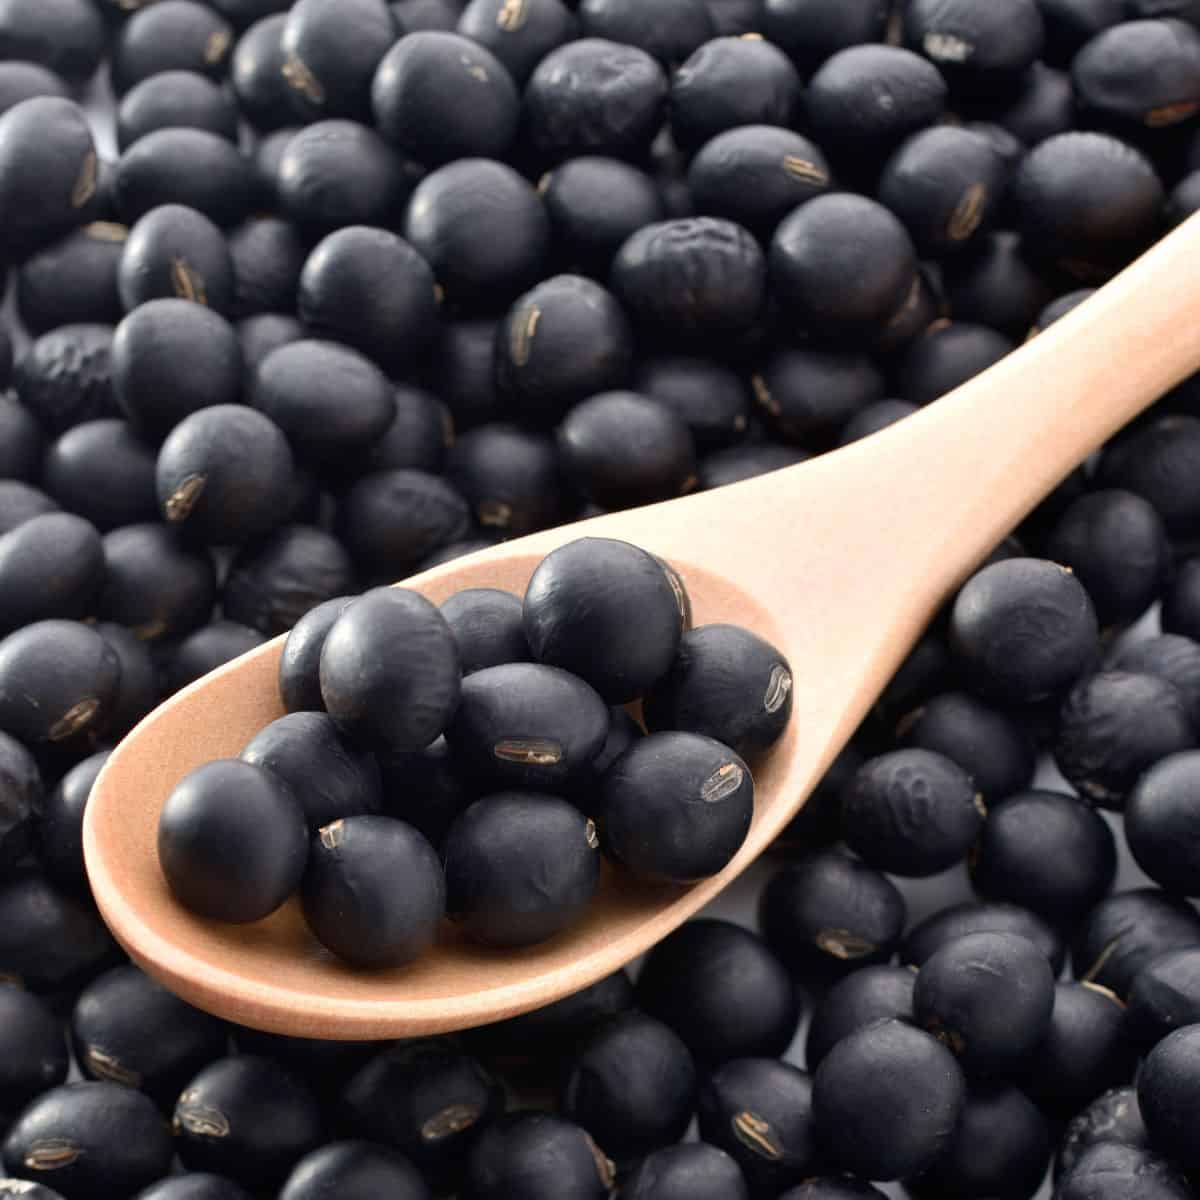 Many small black soybeans are seen with a wood spoon resting in the pile with a few soybeans in the spoon.